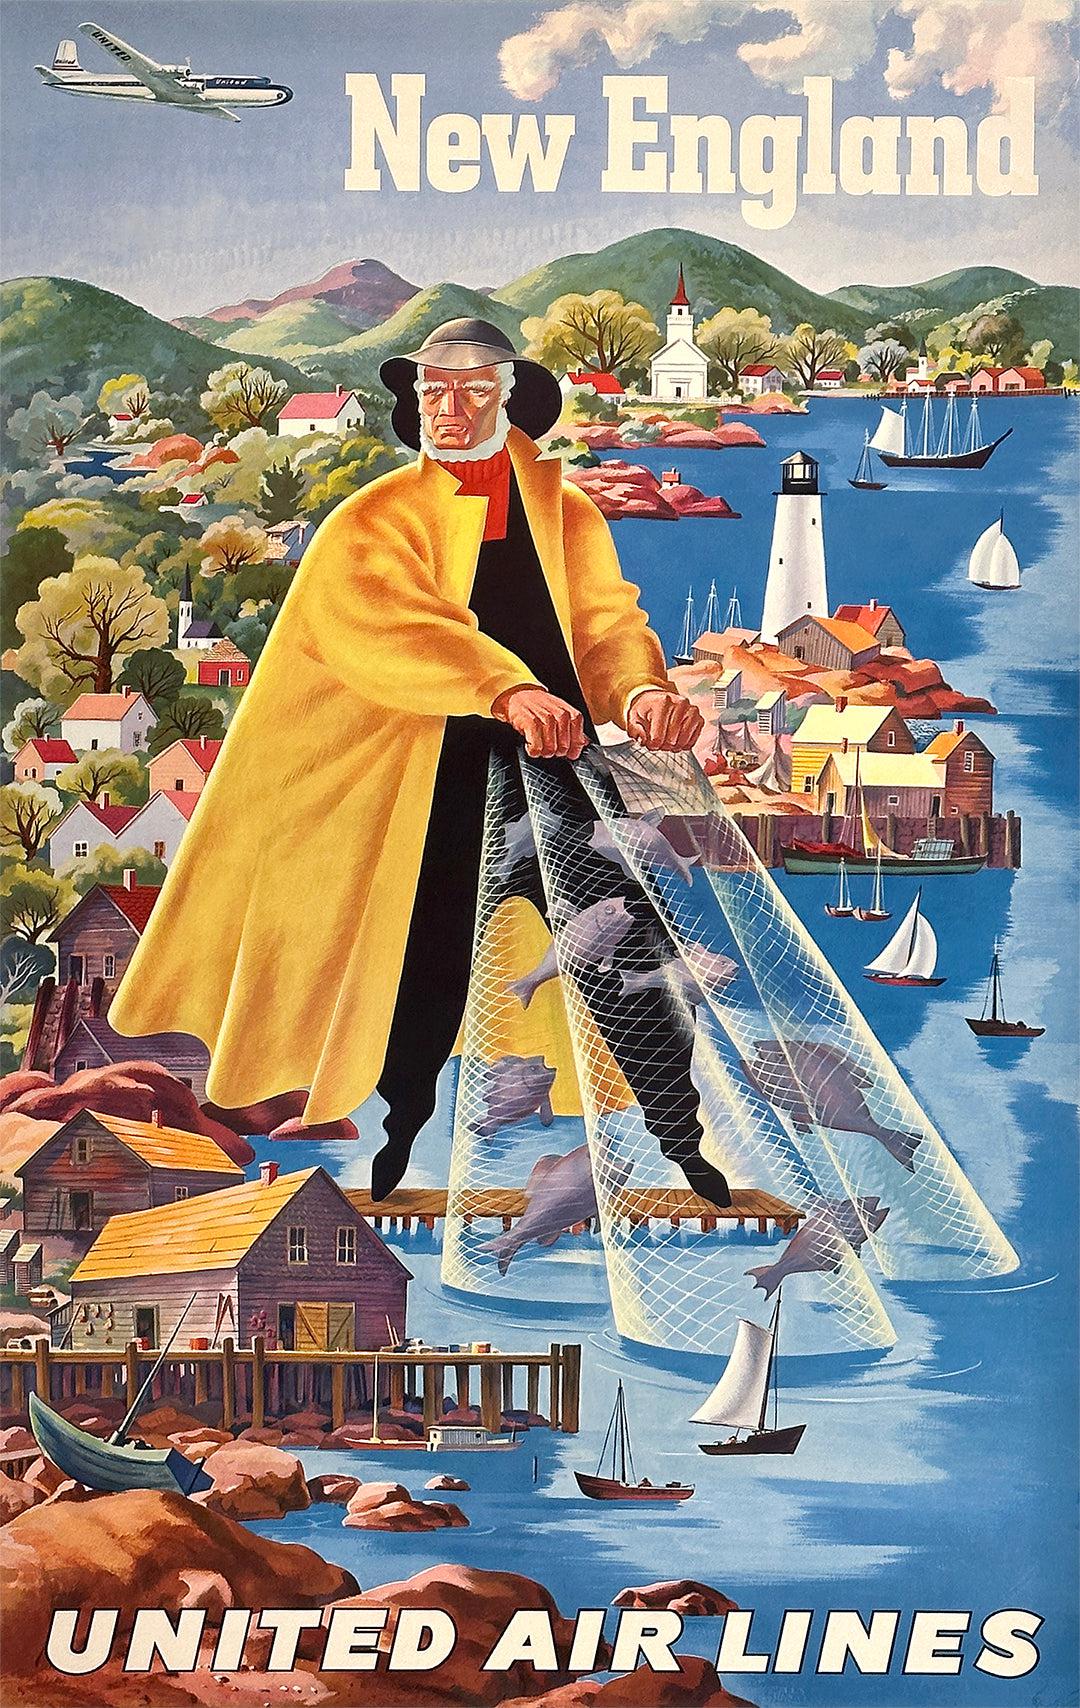 Original Vintage United Air Lines New England Poster Fisherman c1950 by Joseph Feher